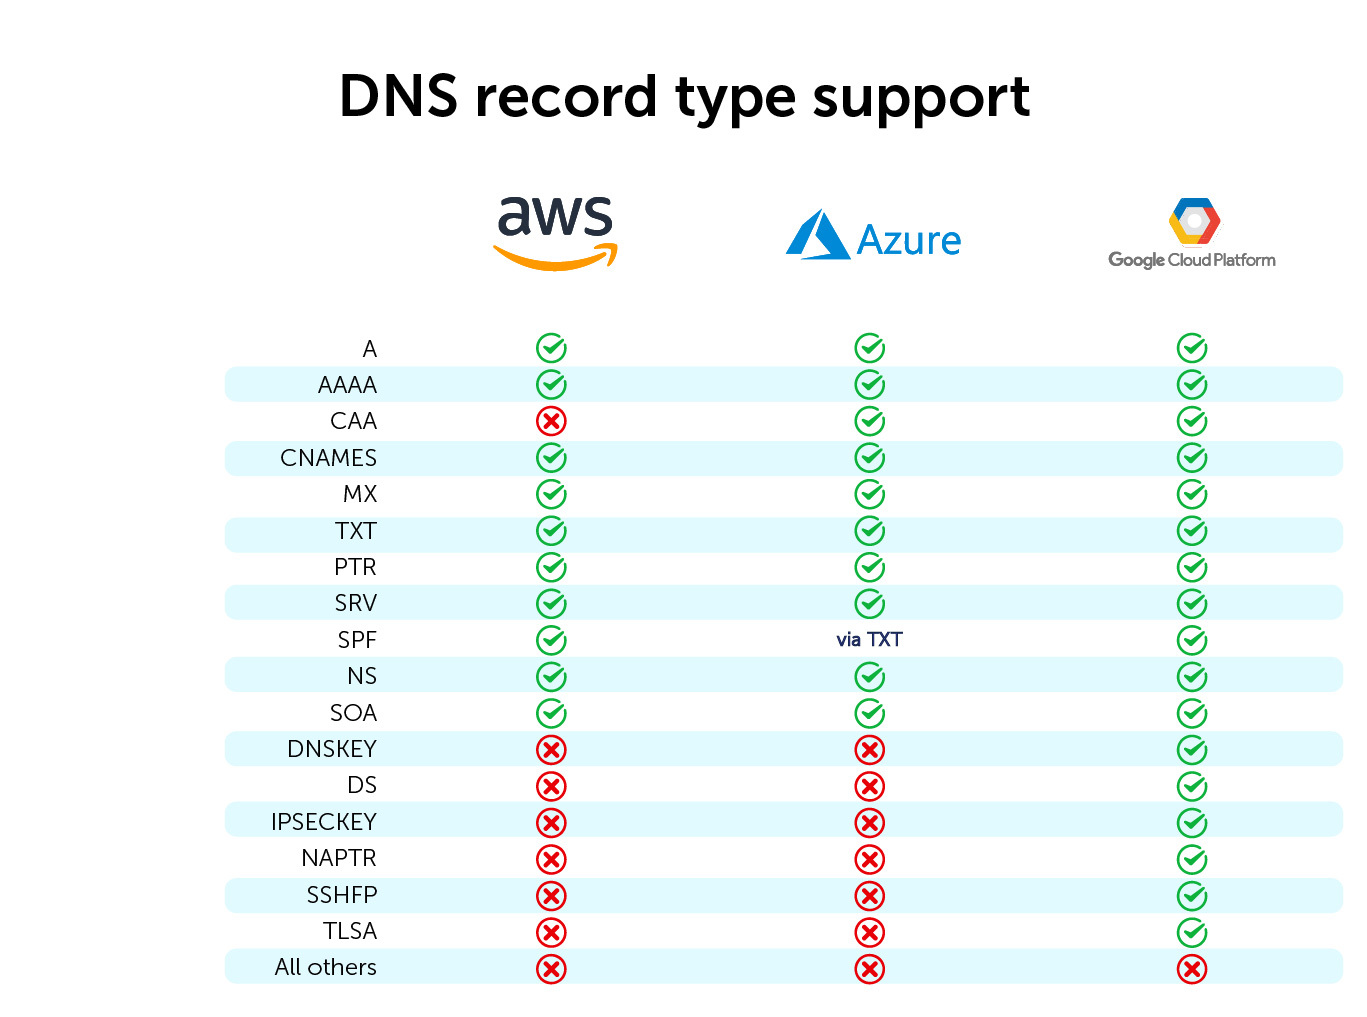 DNS record type support among AWS, Azure and GCP